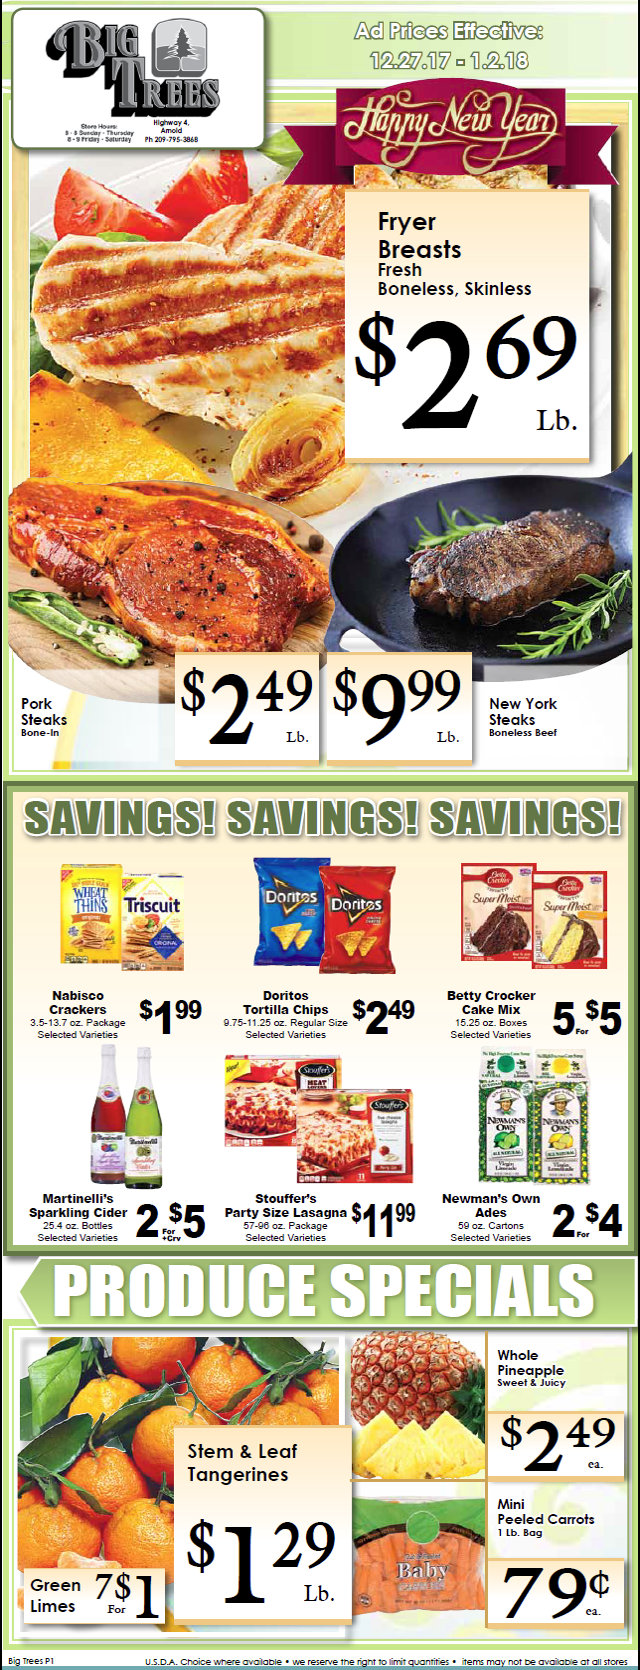 Big Trees Market Weekly Ad & Grocery Specials Through January 2nd, 2018